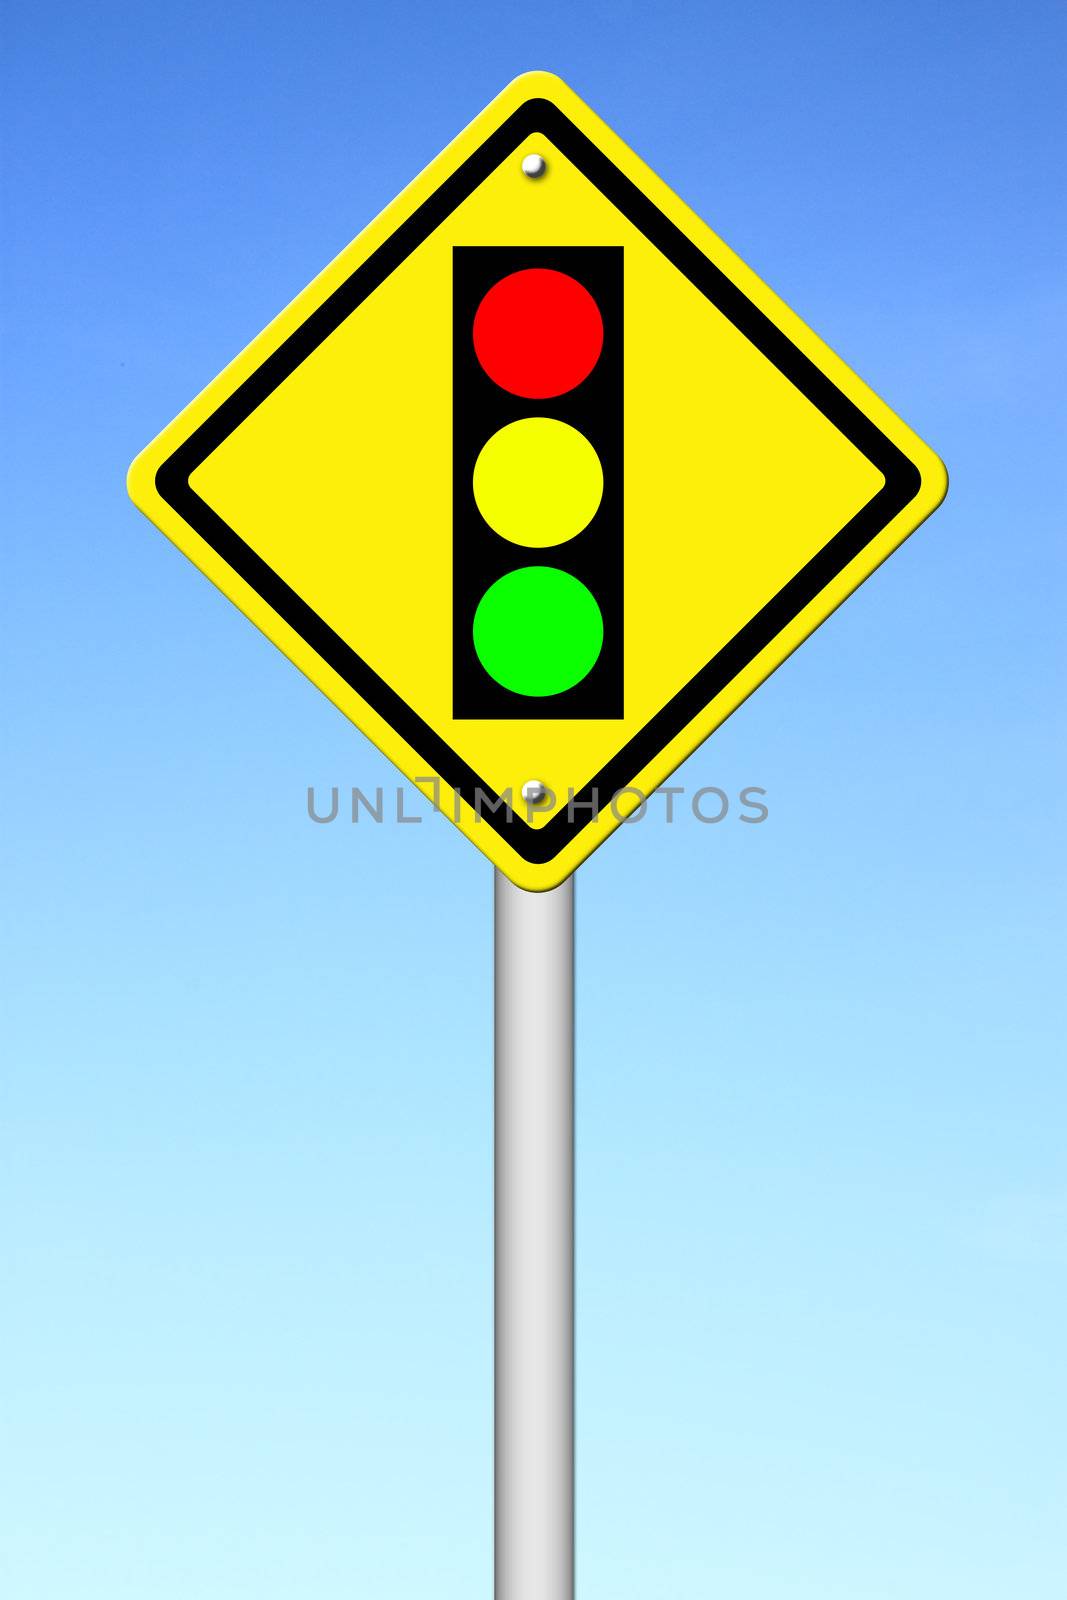 Traffic light ahead warning sign with blue sky background